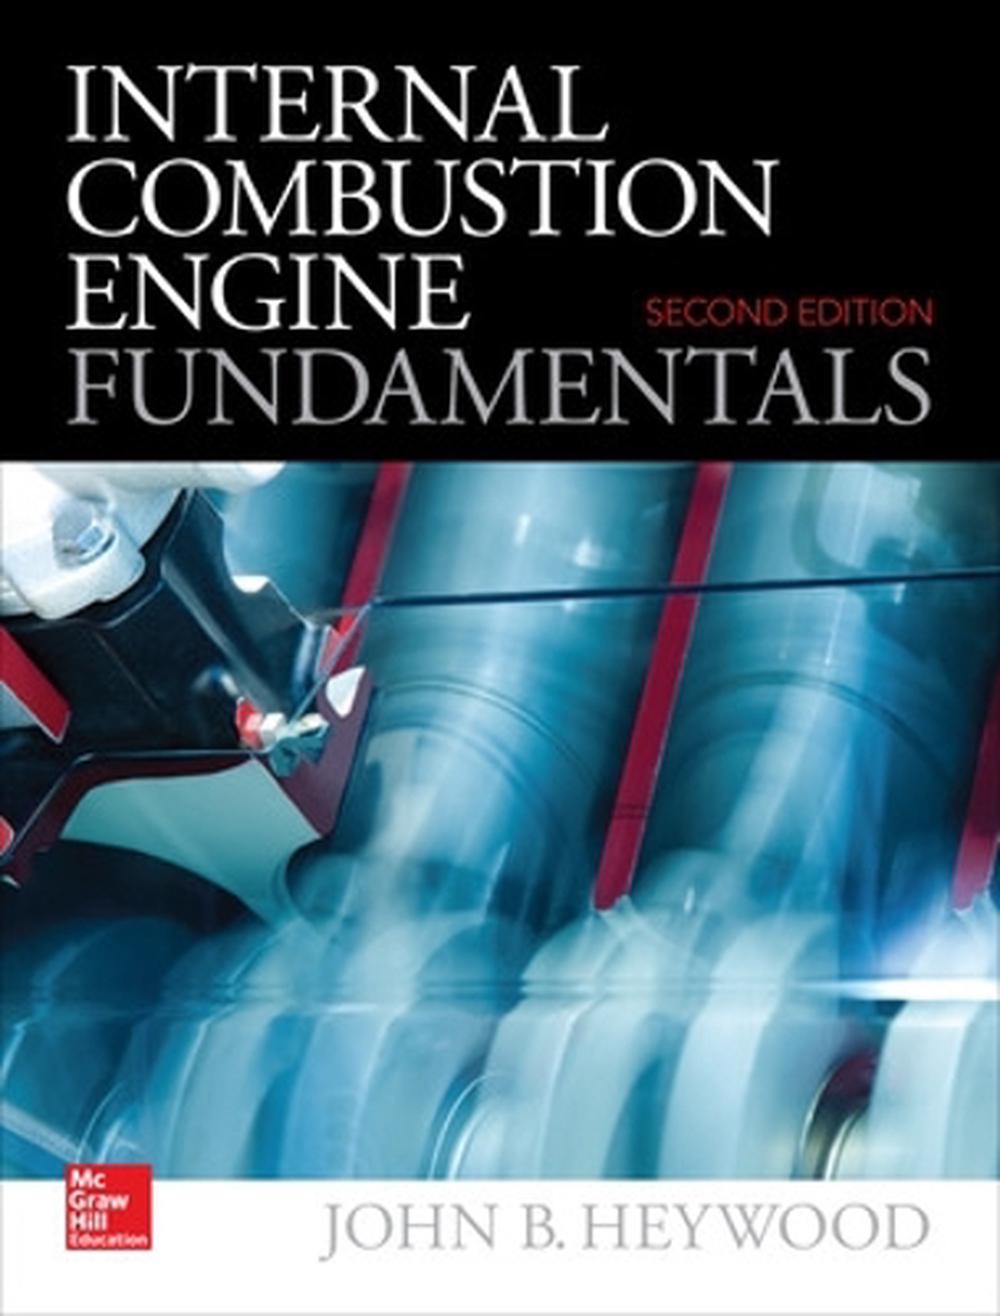 Internal Combustion Engine Fundamentals 2E 2nd Edition by John Heywood Hardcover 9781260116106